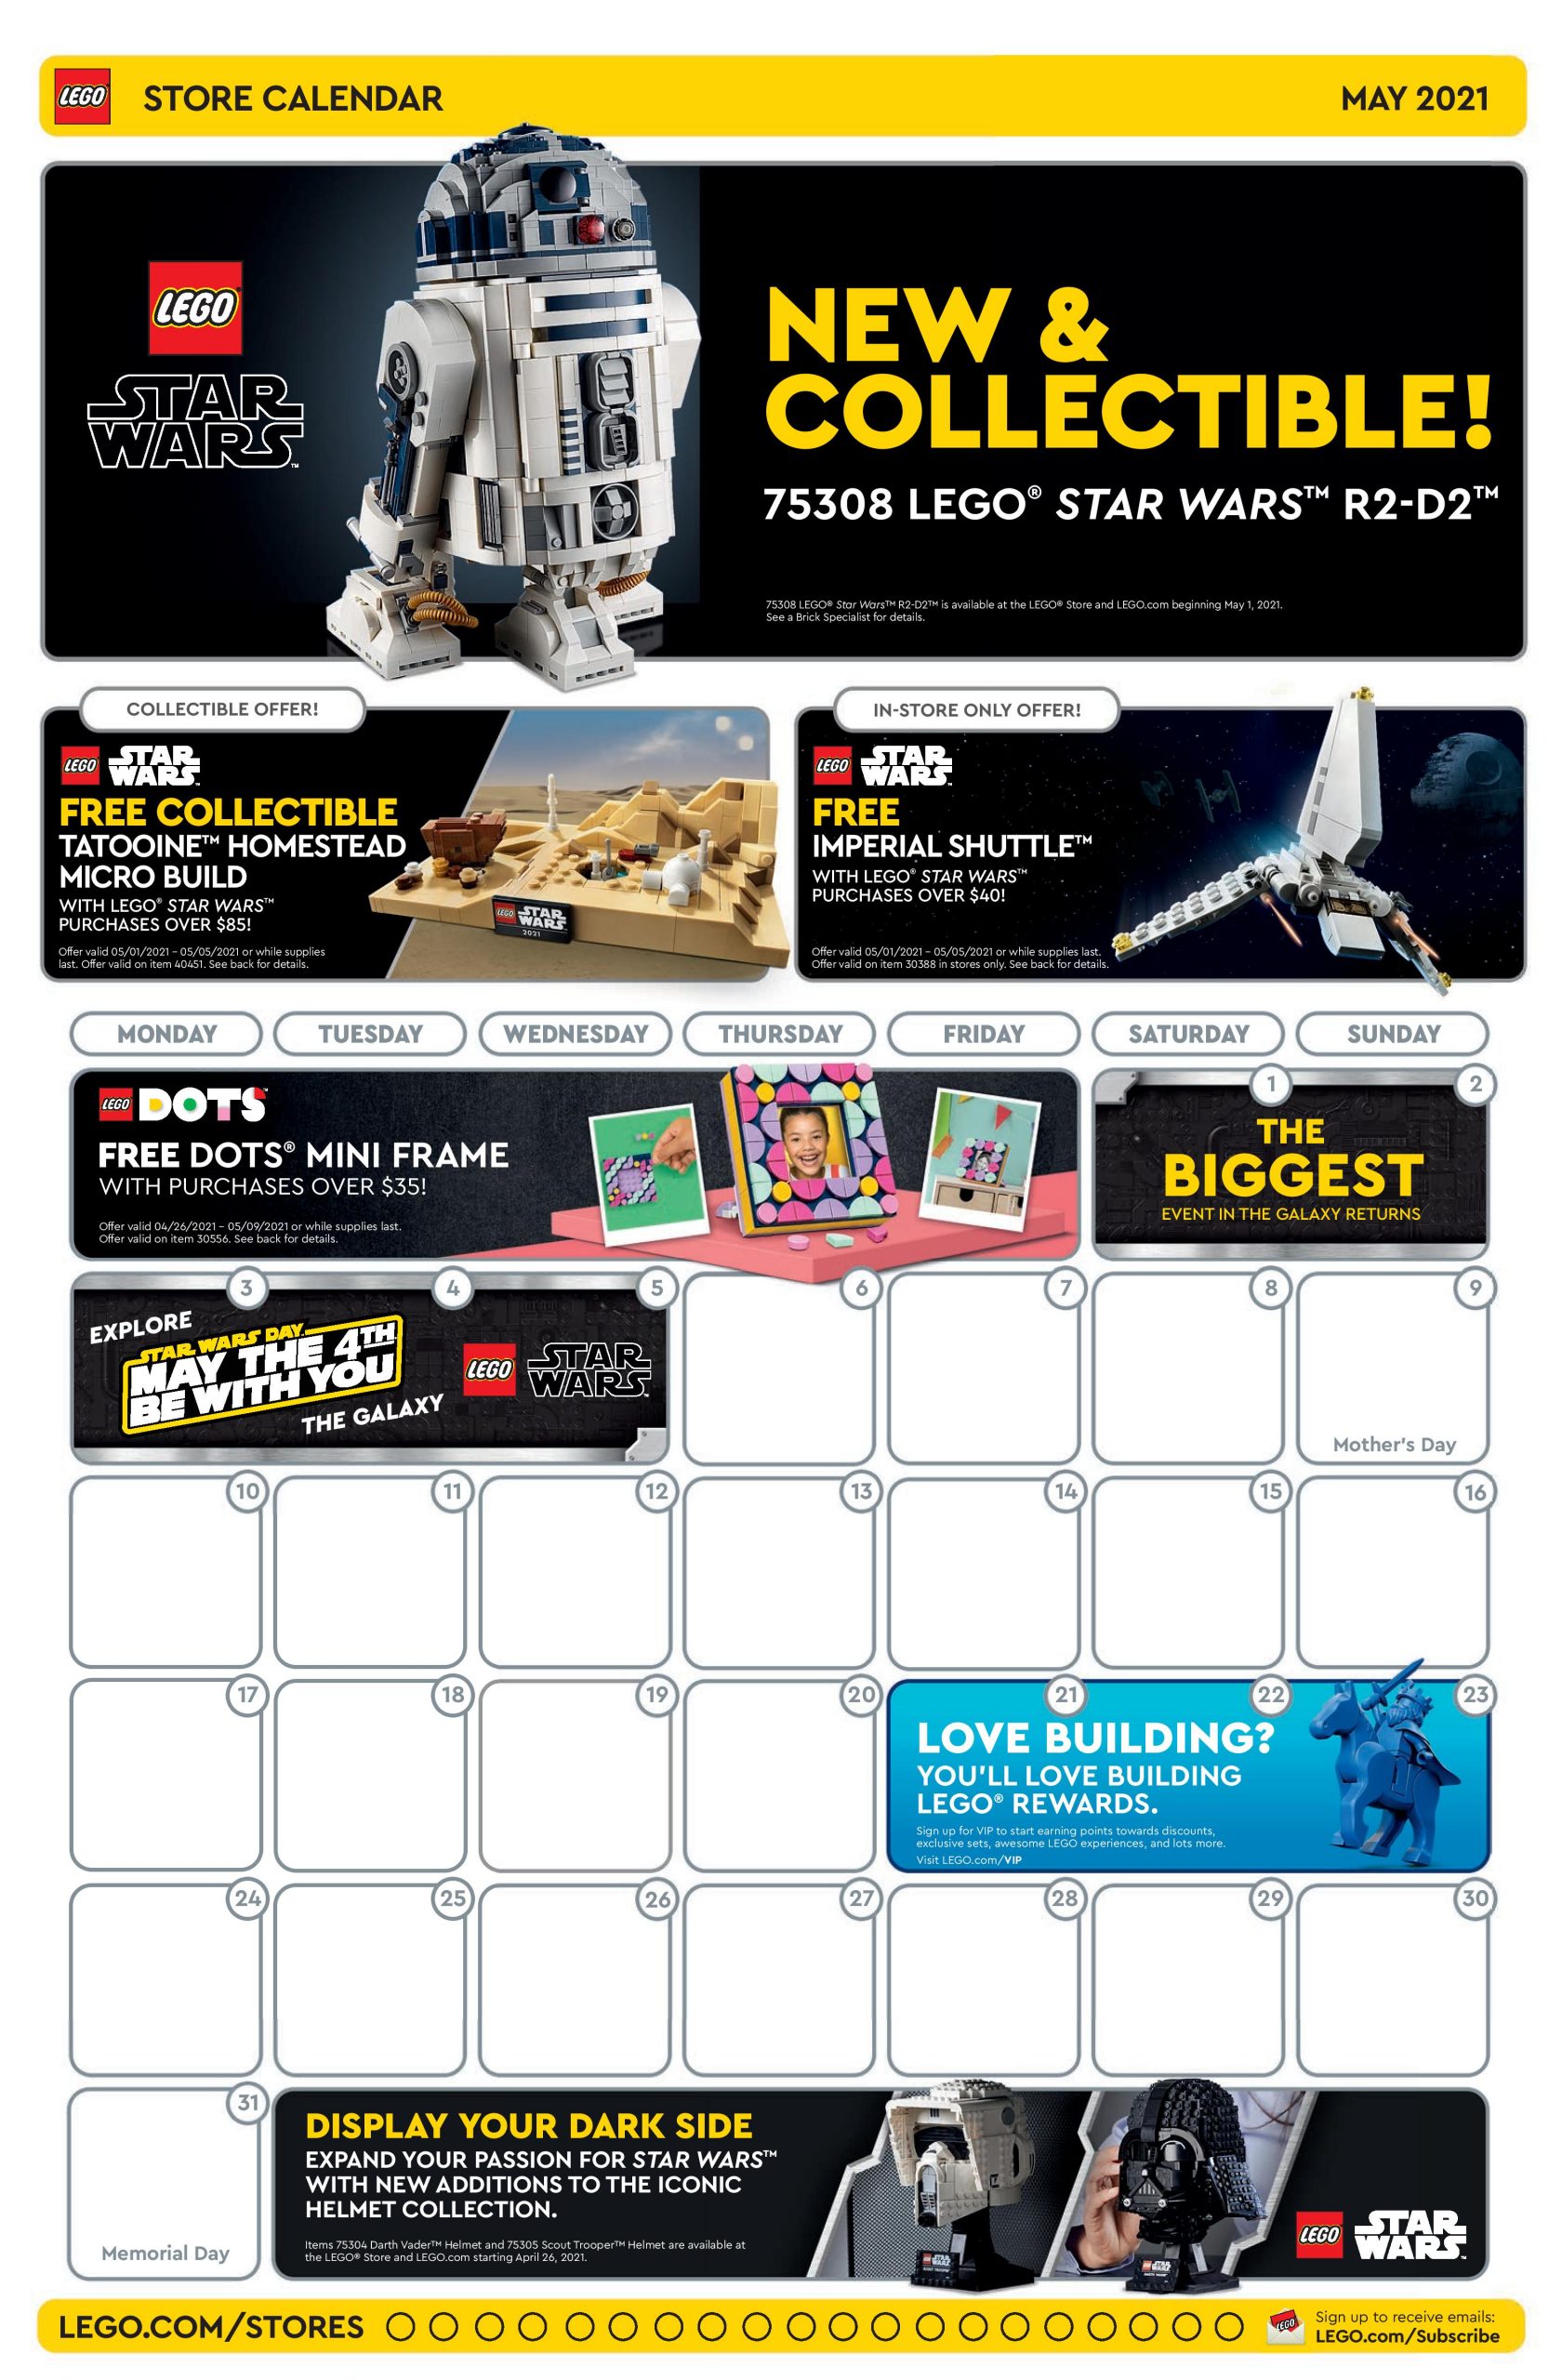 Lego May 2022 Calendar Lego May 2021 Store Calendar Promotions & Events - The Brick Fan